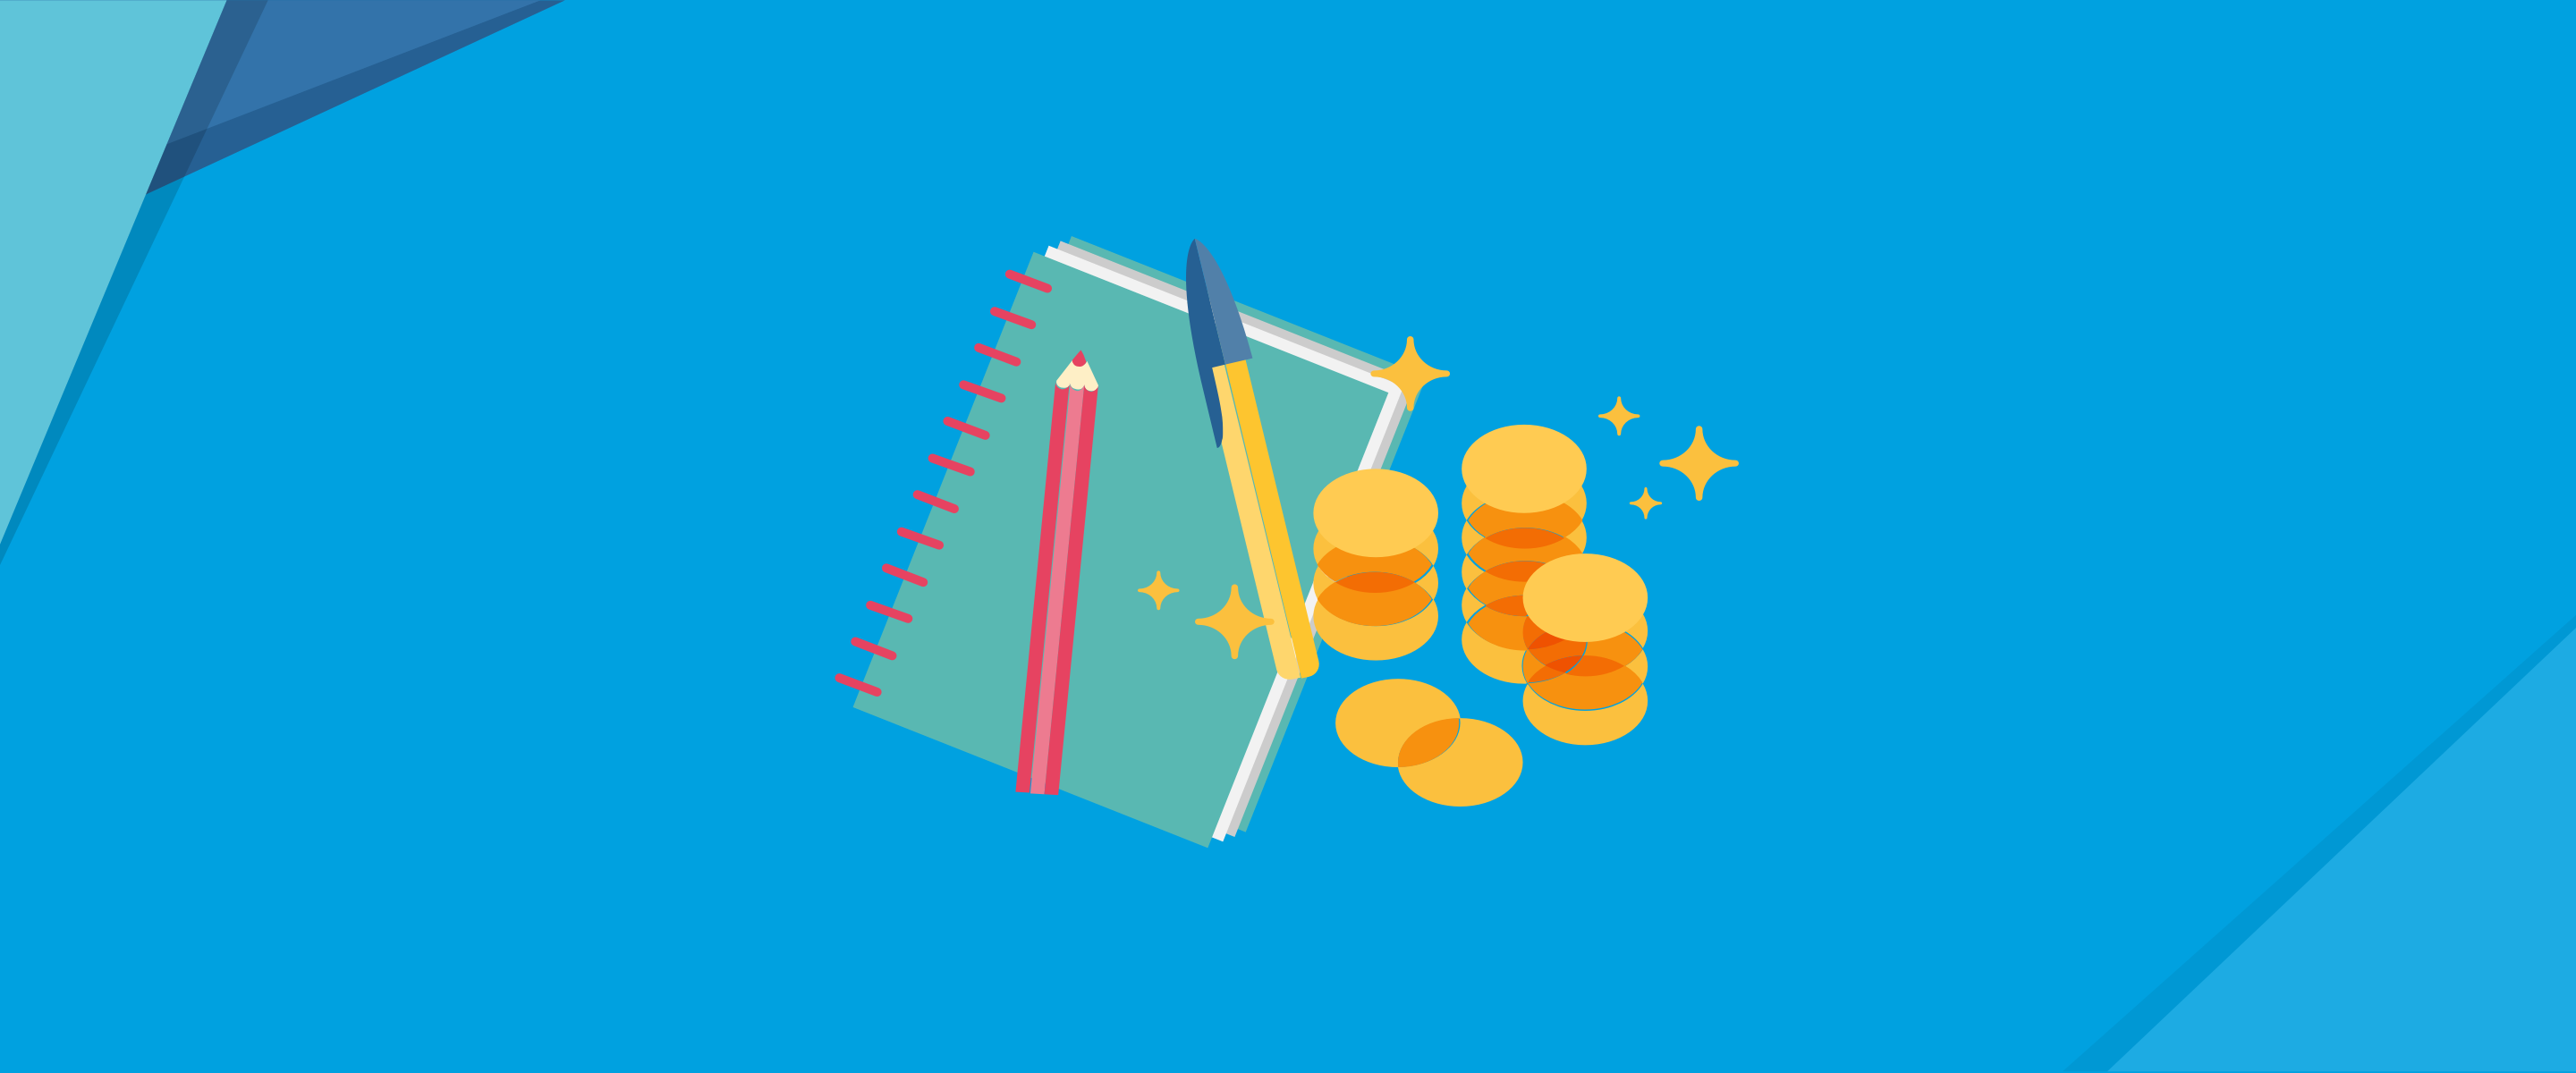 An illustration of a notepad, pencil, pen and shining piles of coins against a blue background with origami shapes decorating the corners